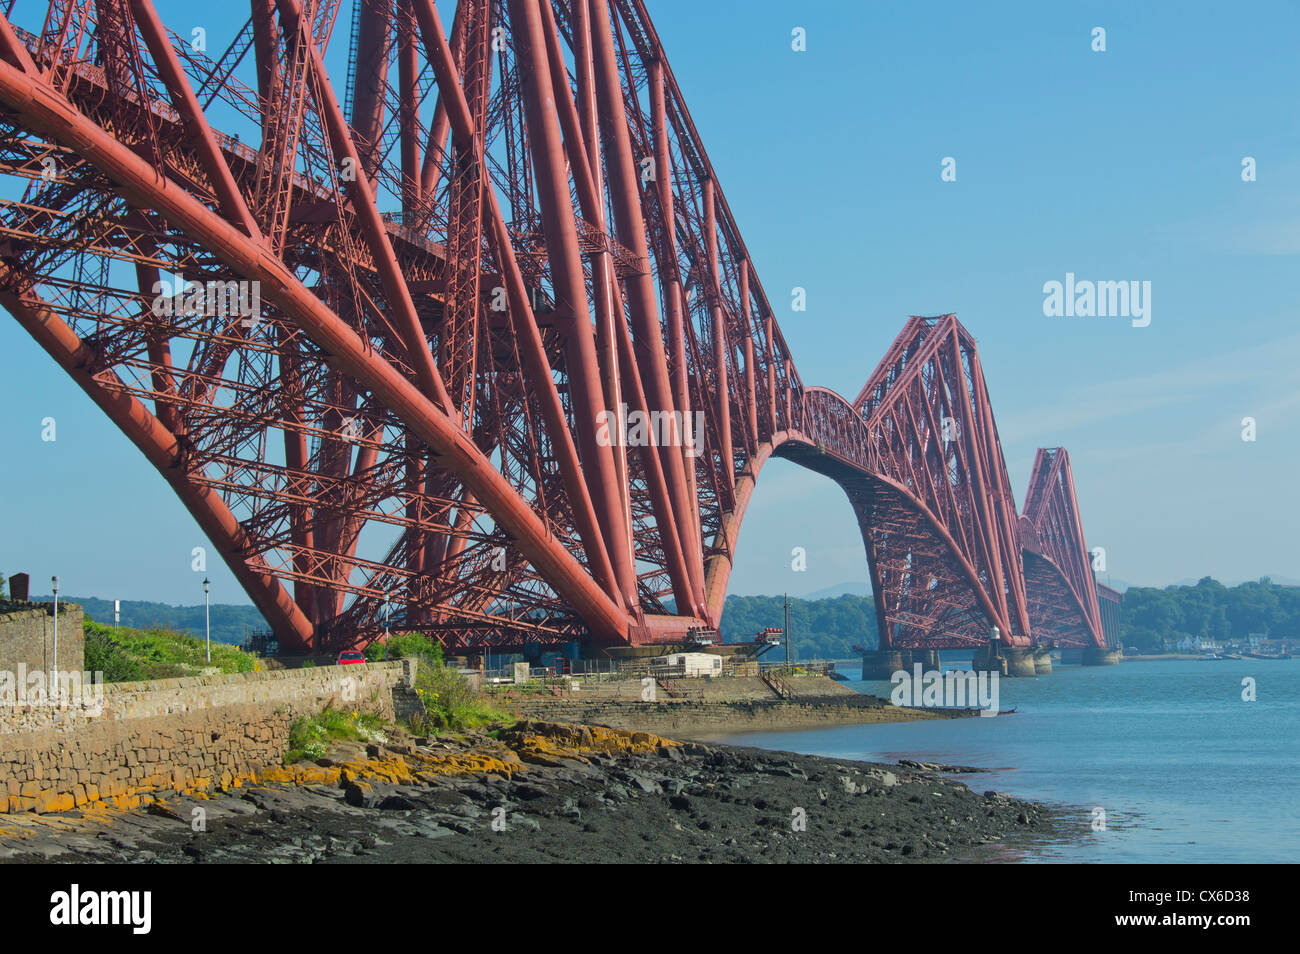 Forth Rail Bridge, North Queensferry, Ecosse, Royaume-Uni Banque D'Images